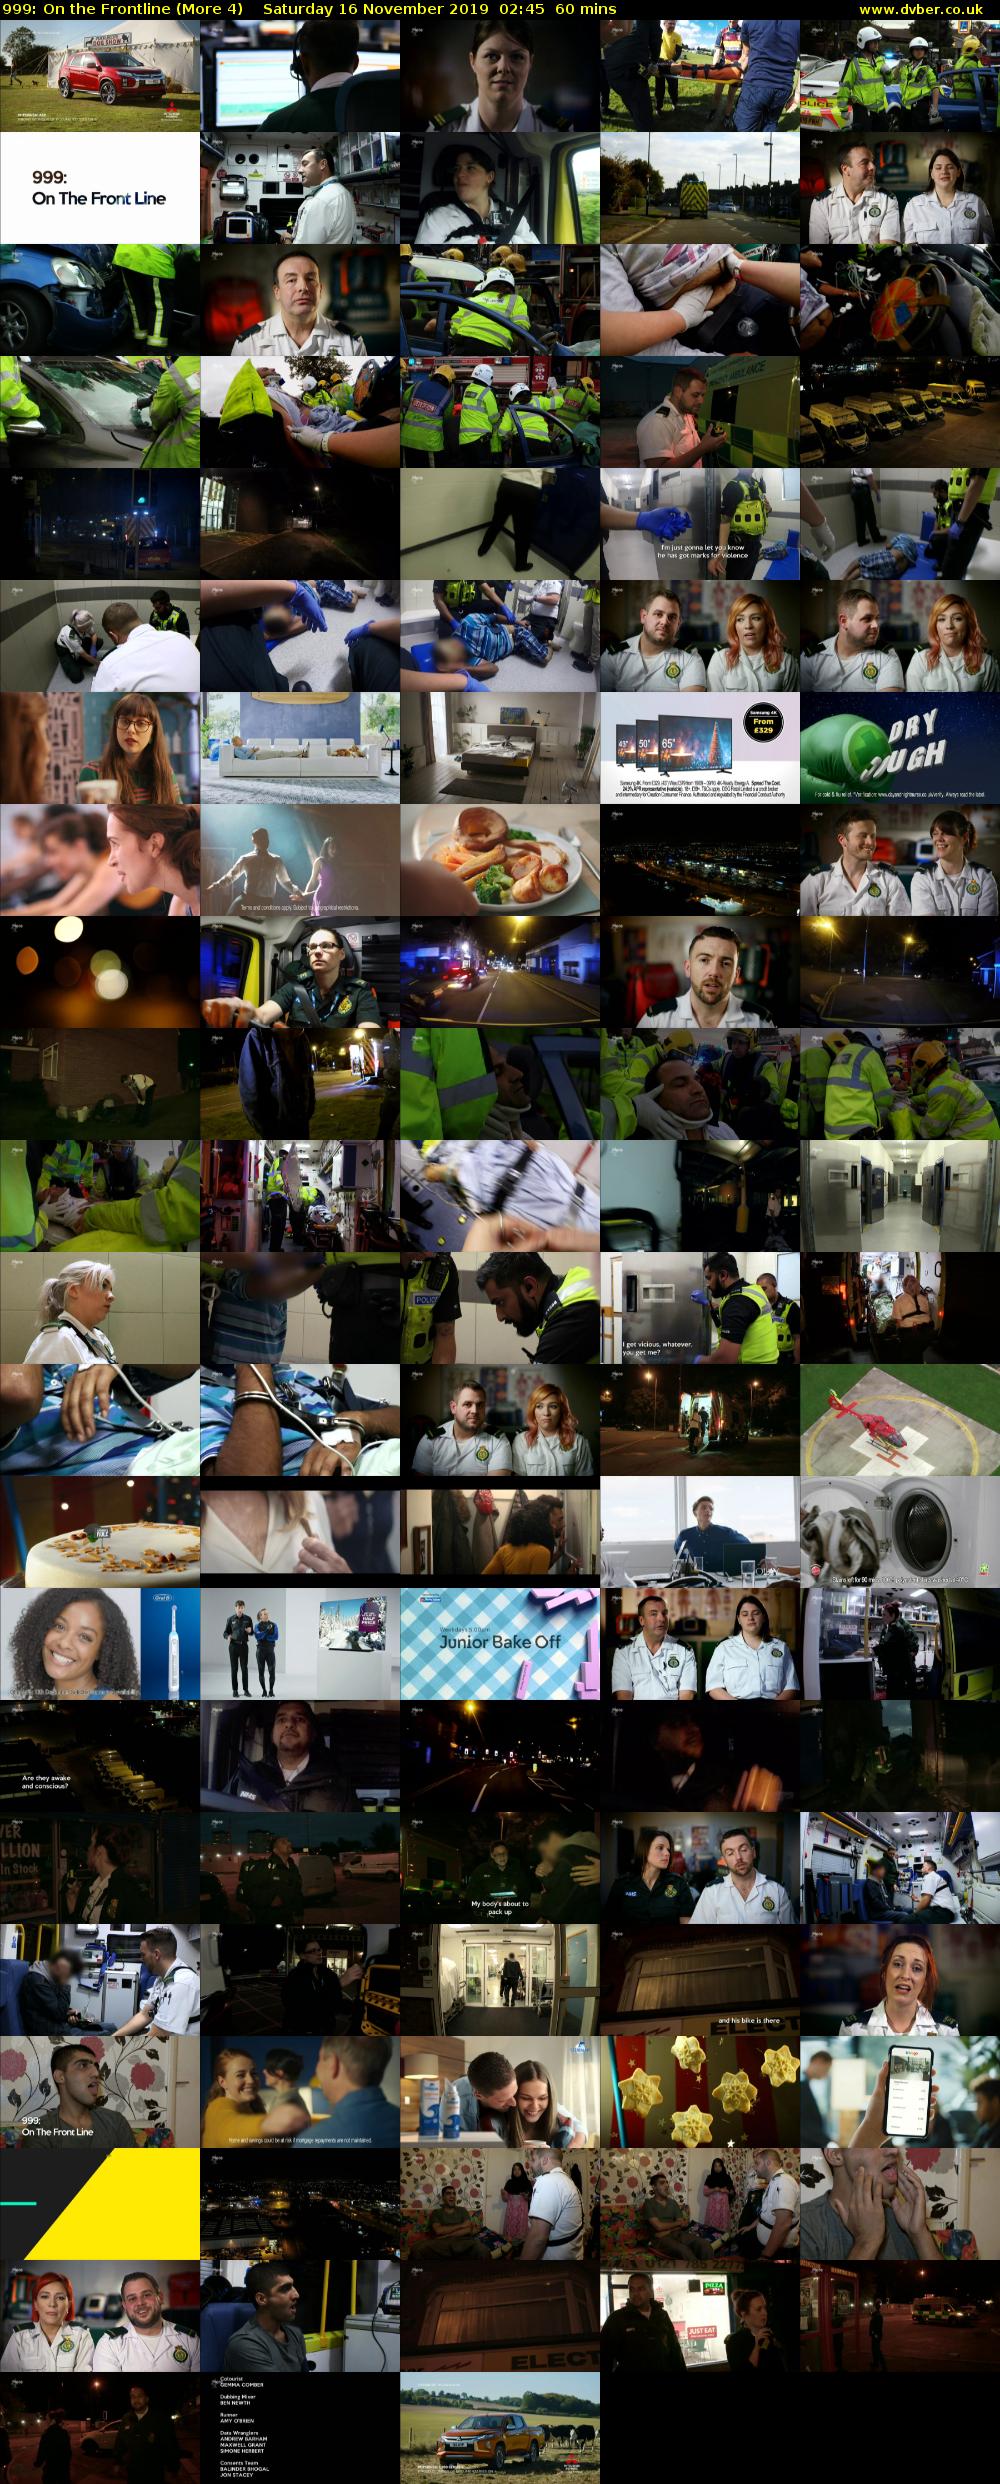 999: On the Frontline (More 4) Saturday 16 November 2019 02:45 - 03:45